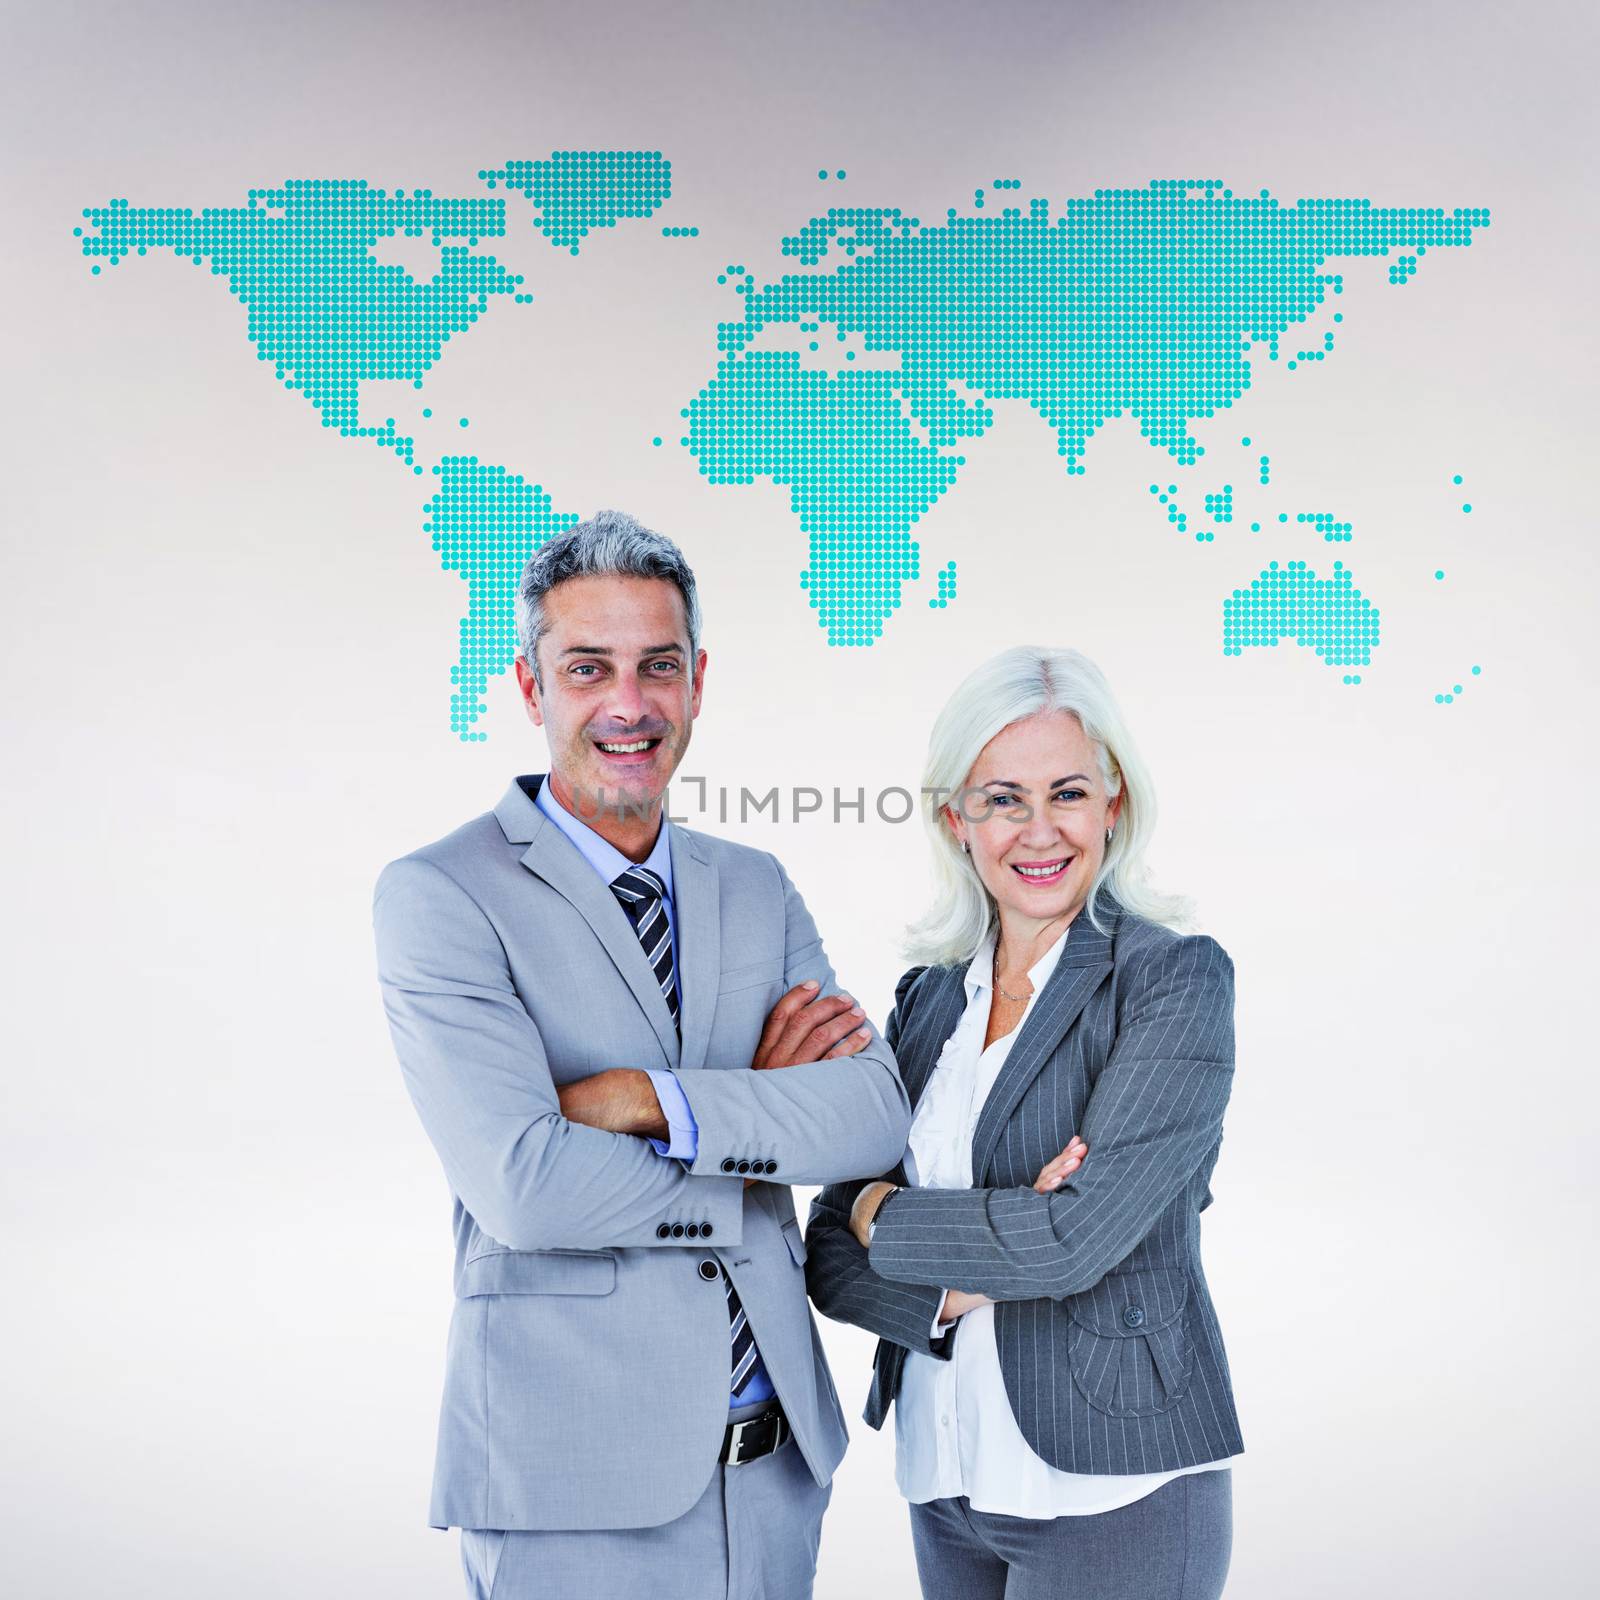 Composite image of  smiling businesswoman and man with arms crossed by Wavebreakmedia